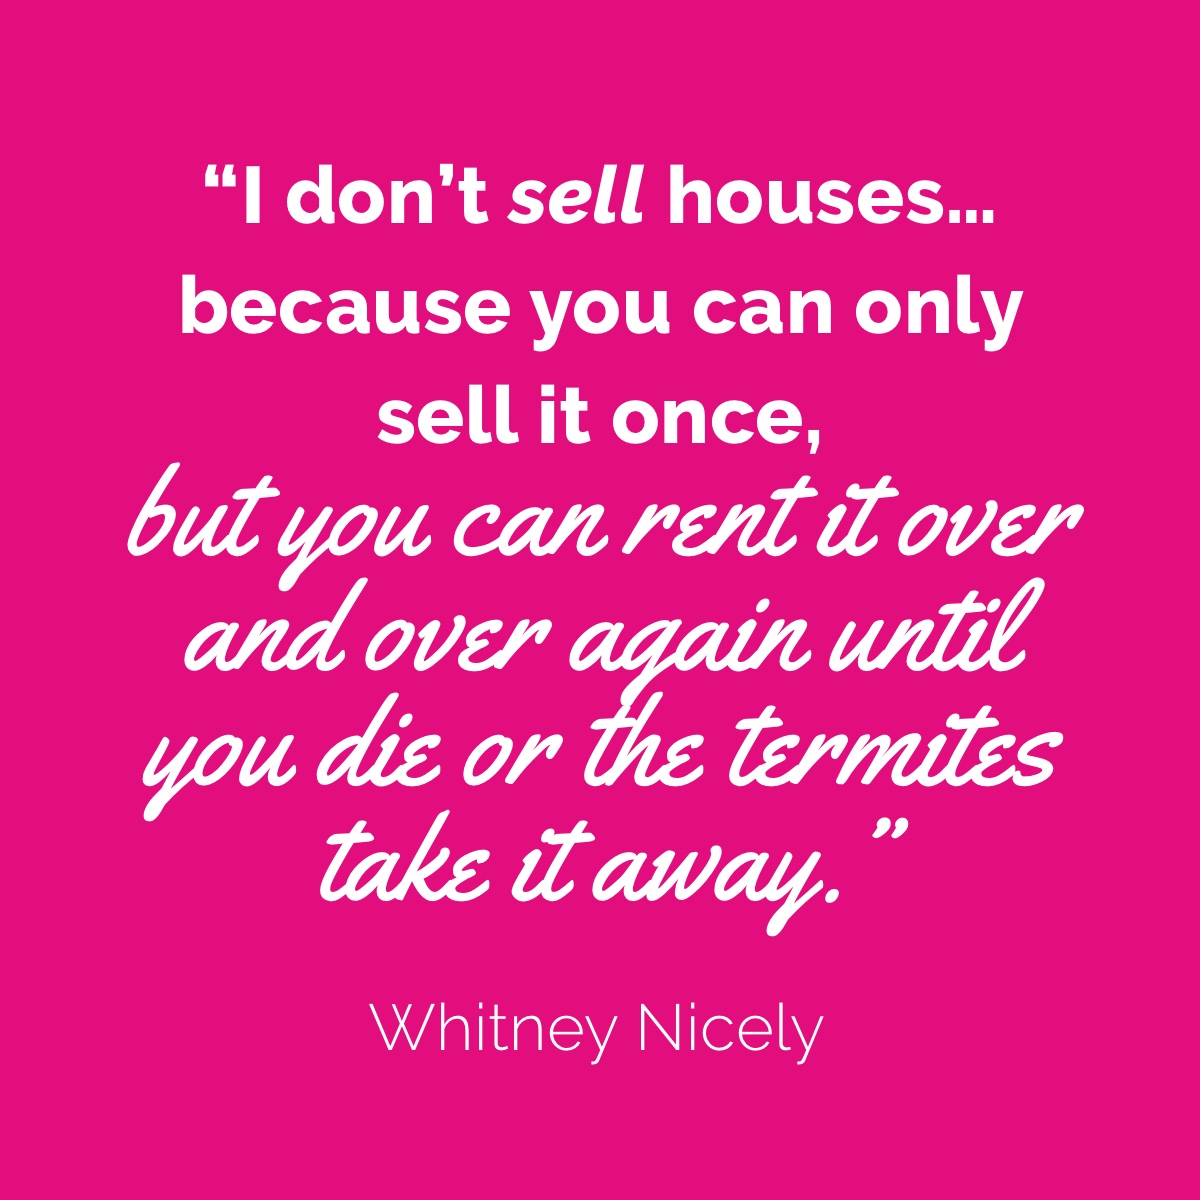 pink background with Whitney Nicely quote: "I don't sell houses...because you can only sell it once, but you can rent it over and over again until you die or the termites take it away."